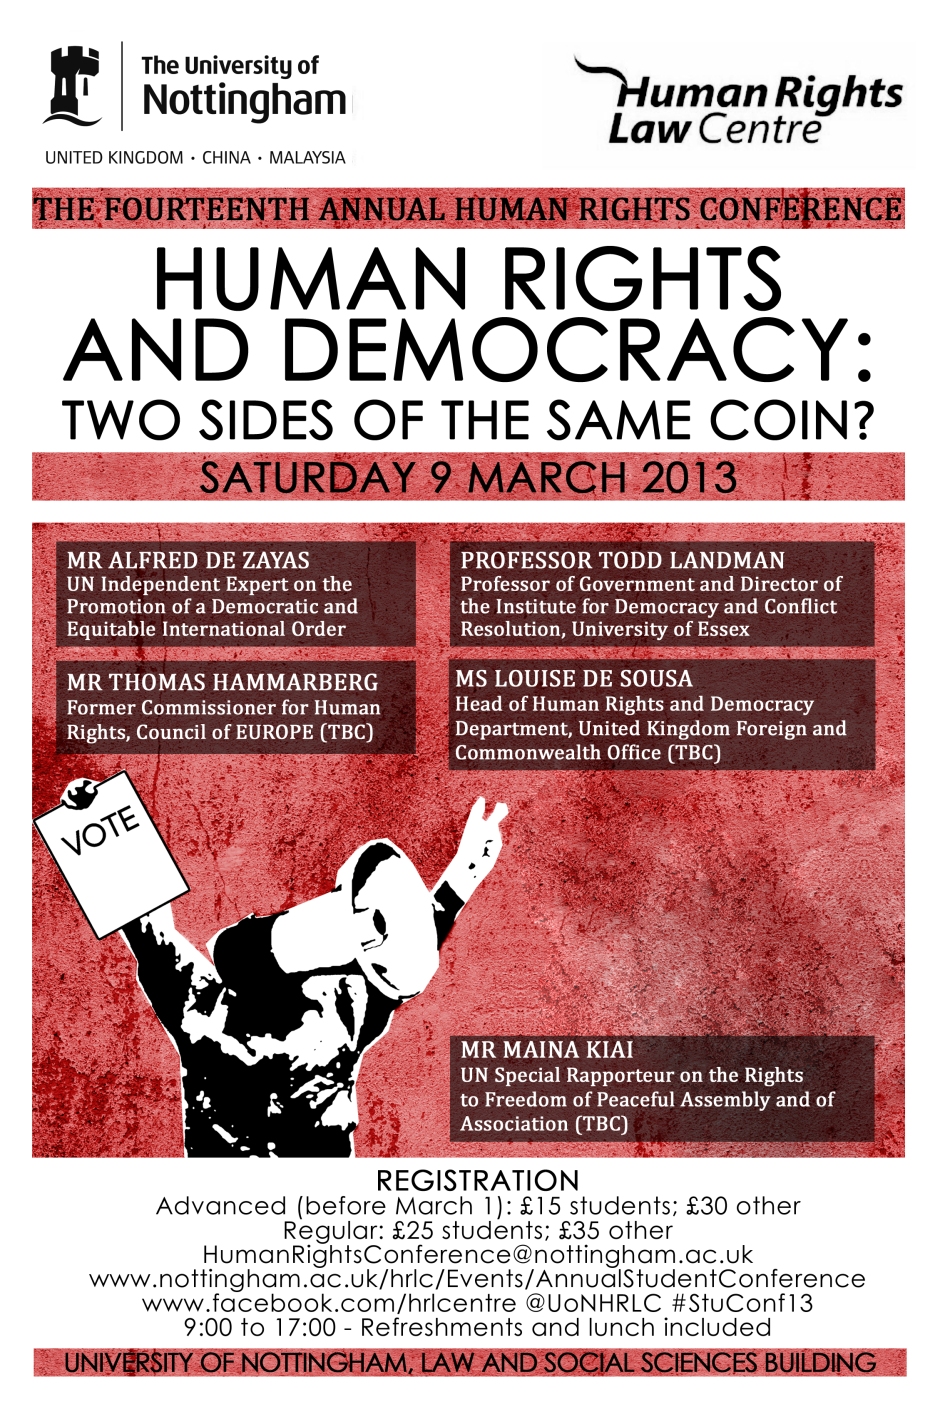 Human Rights Conference Poster, 2013